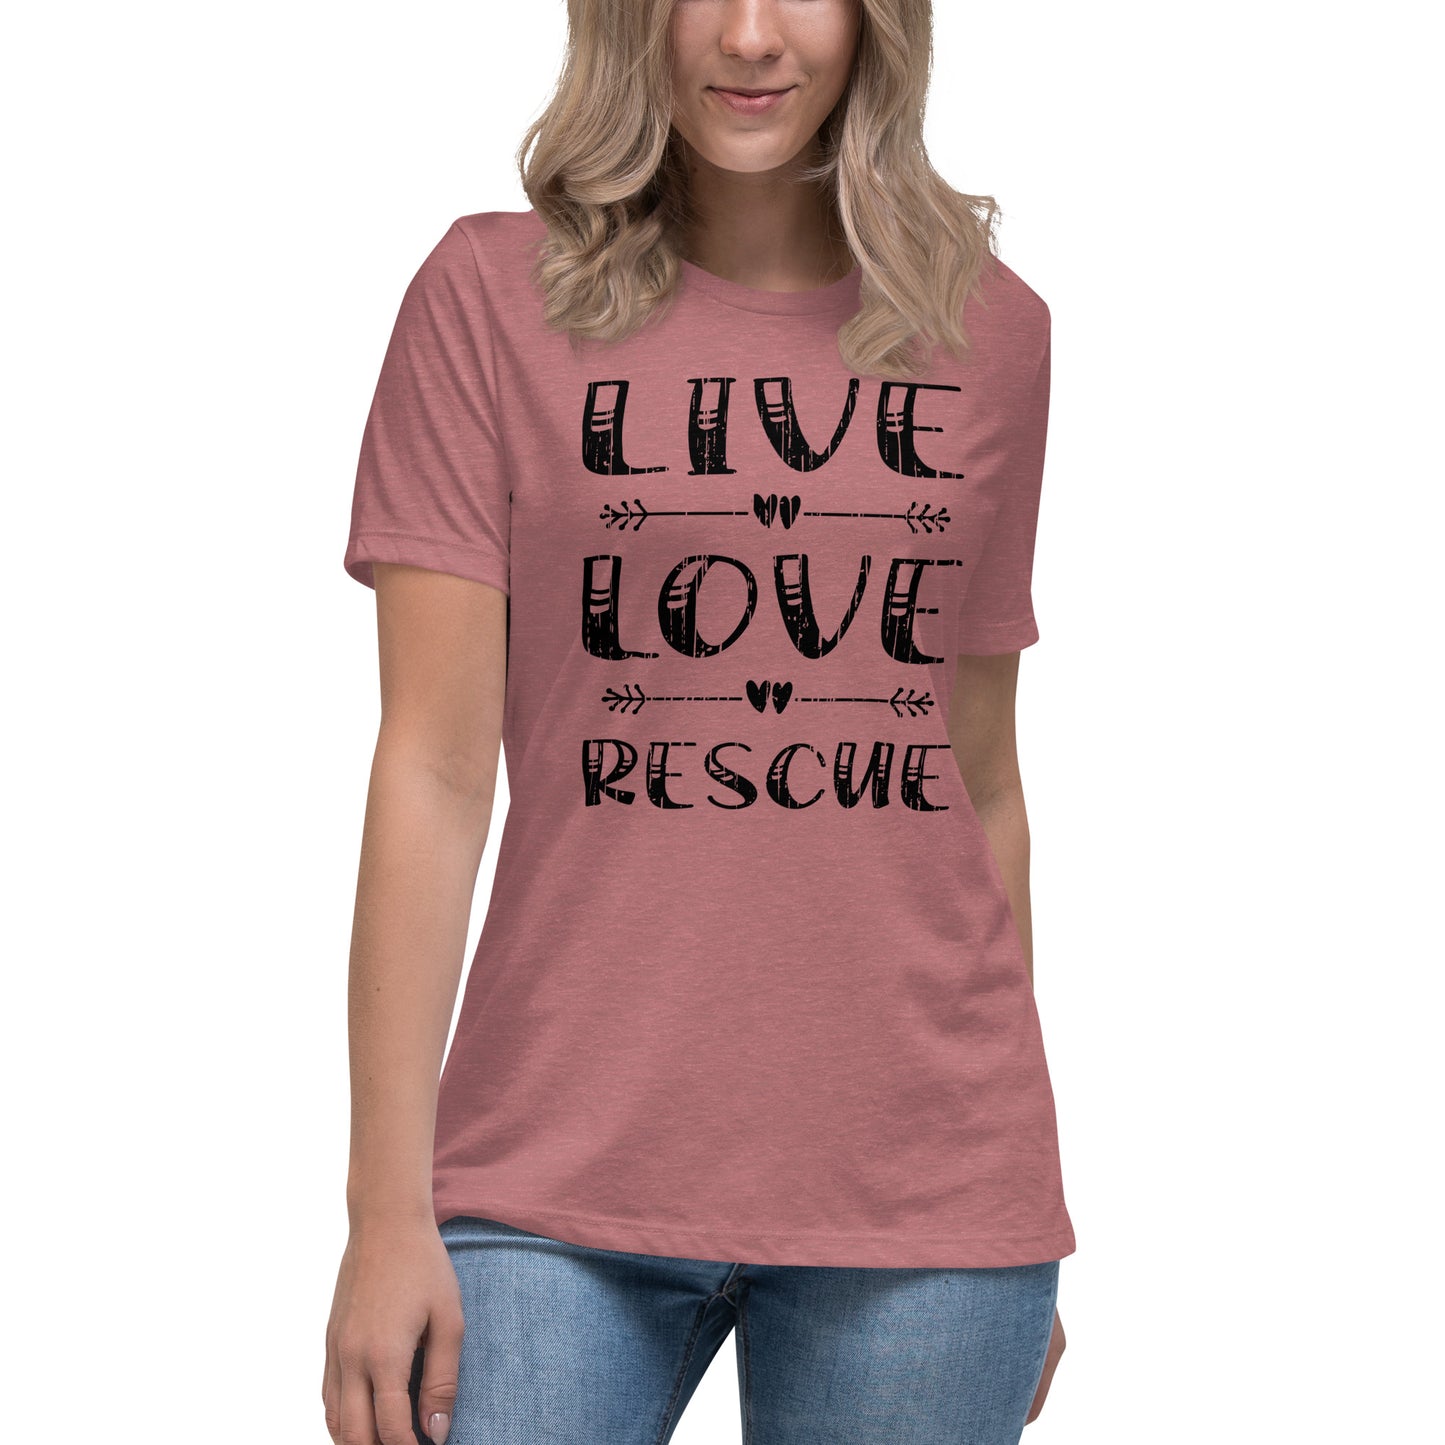 Live love rescue women’s relaxed fit t-shirts by Dog Artistry heather mauve color